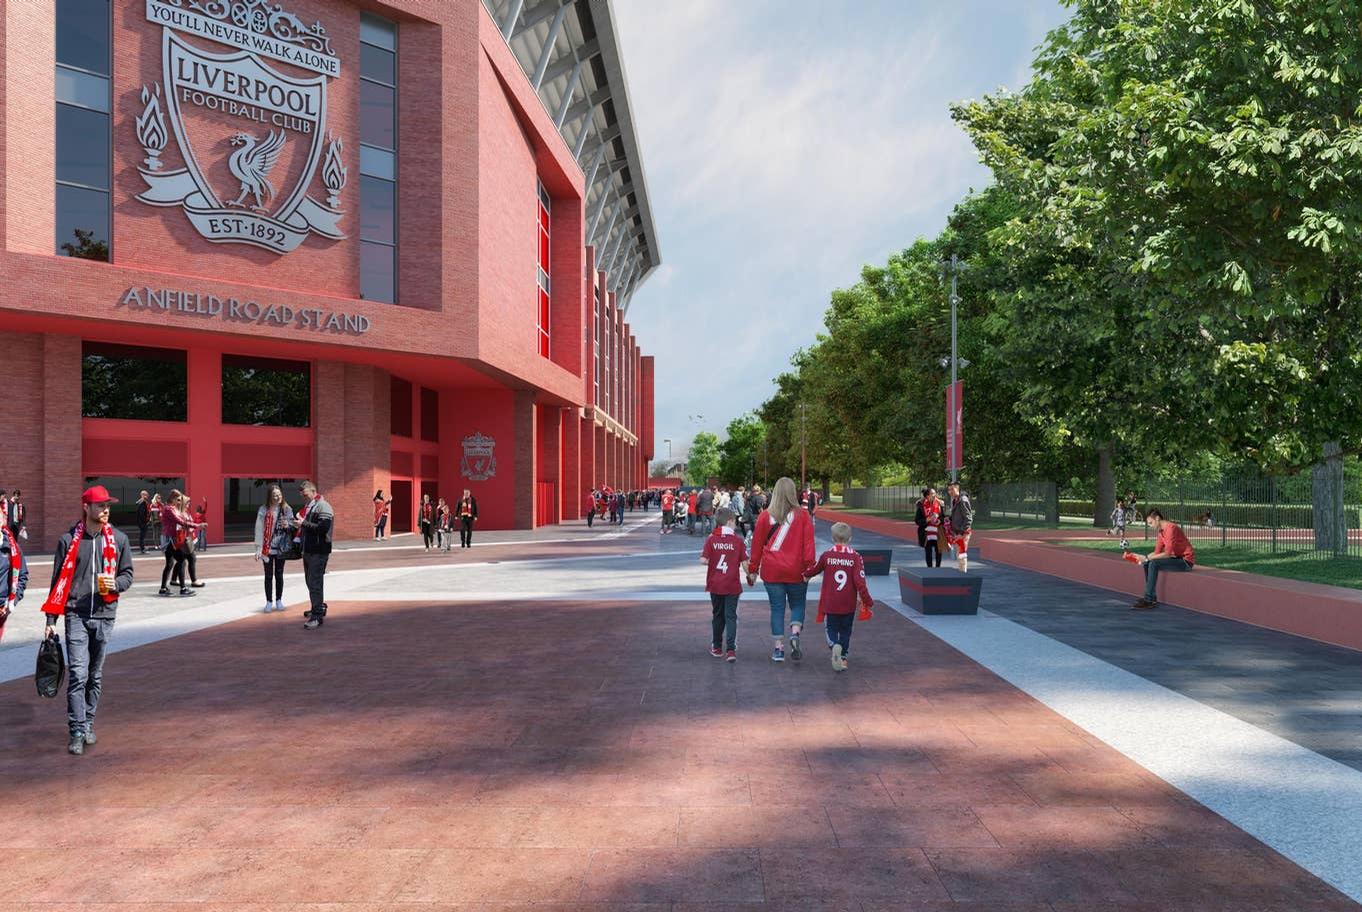 Anfield Road itself will be routed around the footprint of the proposed expanded stand / Liverpool FC